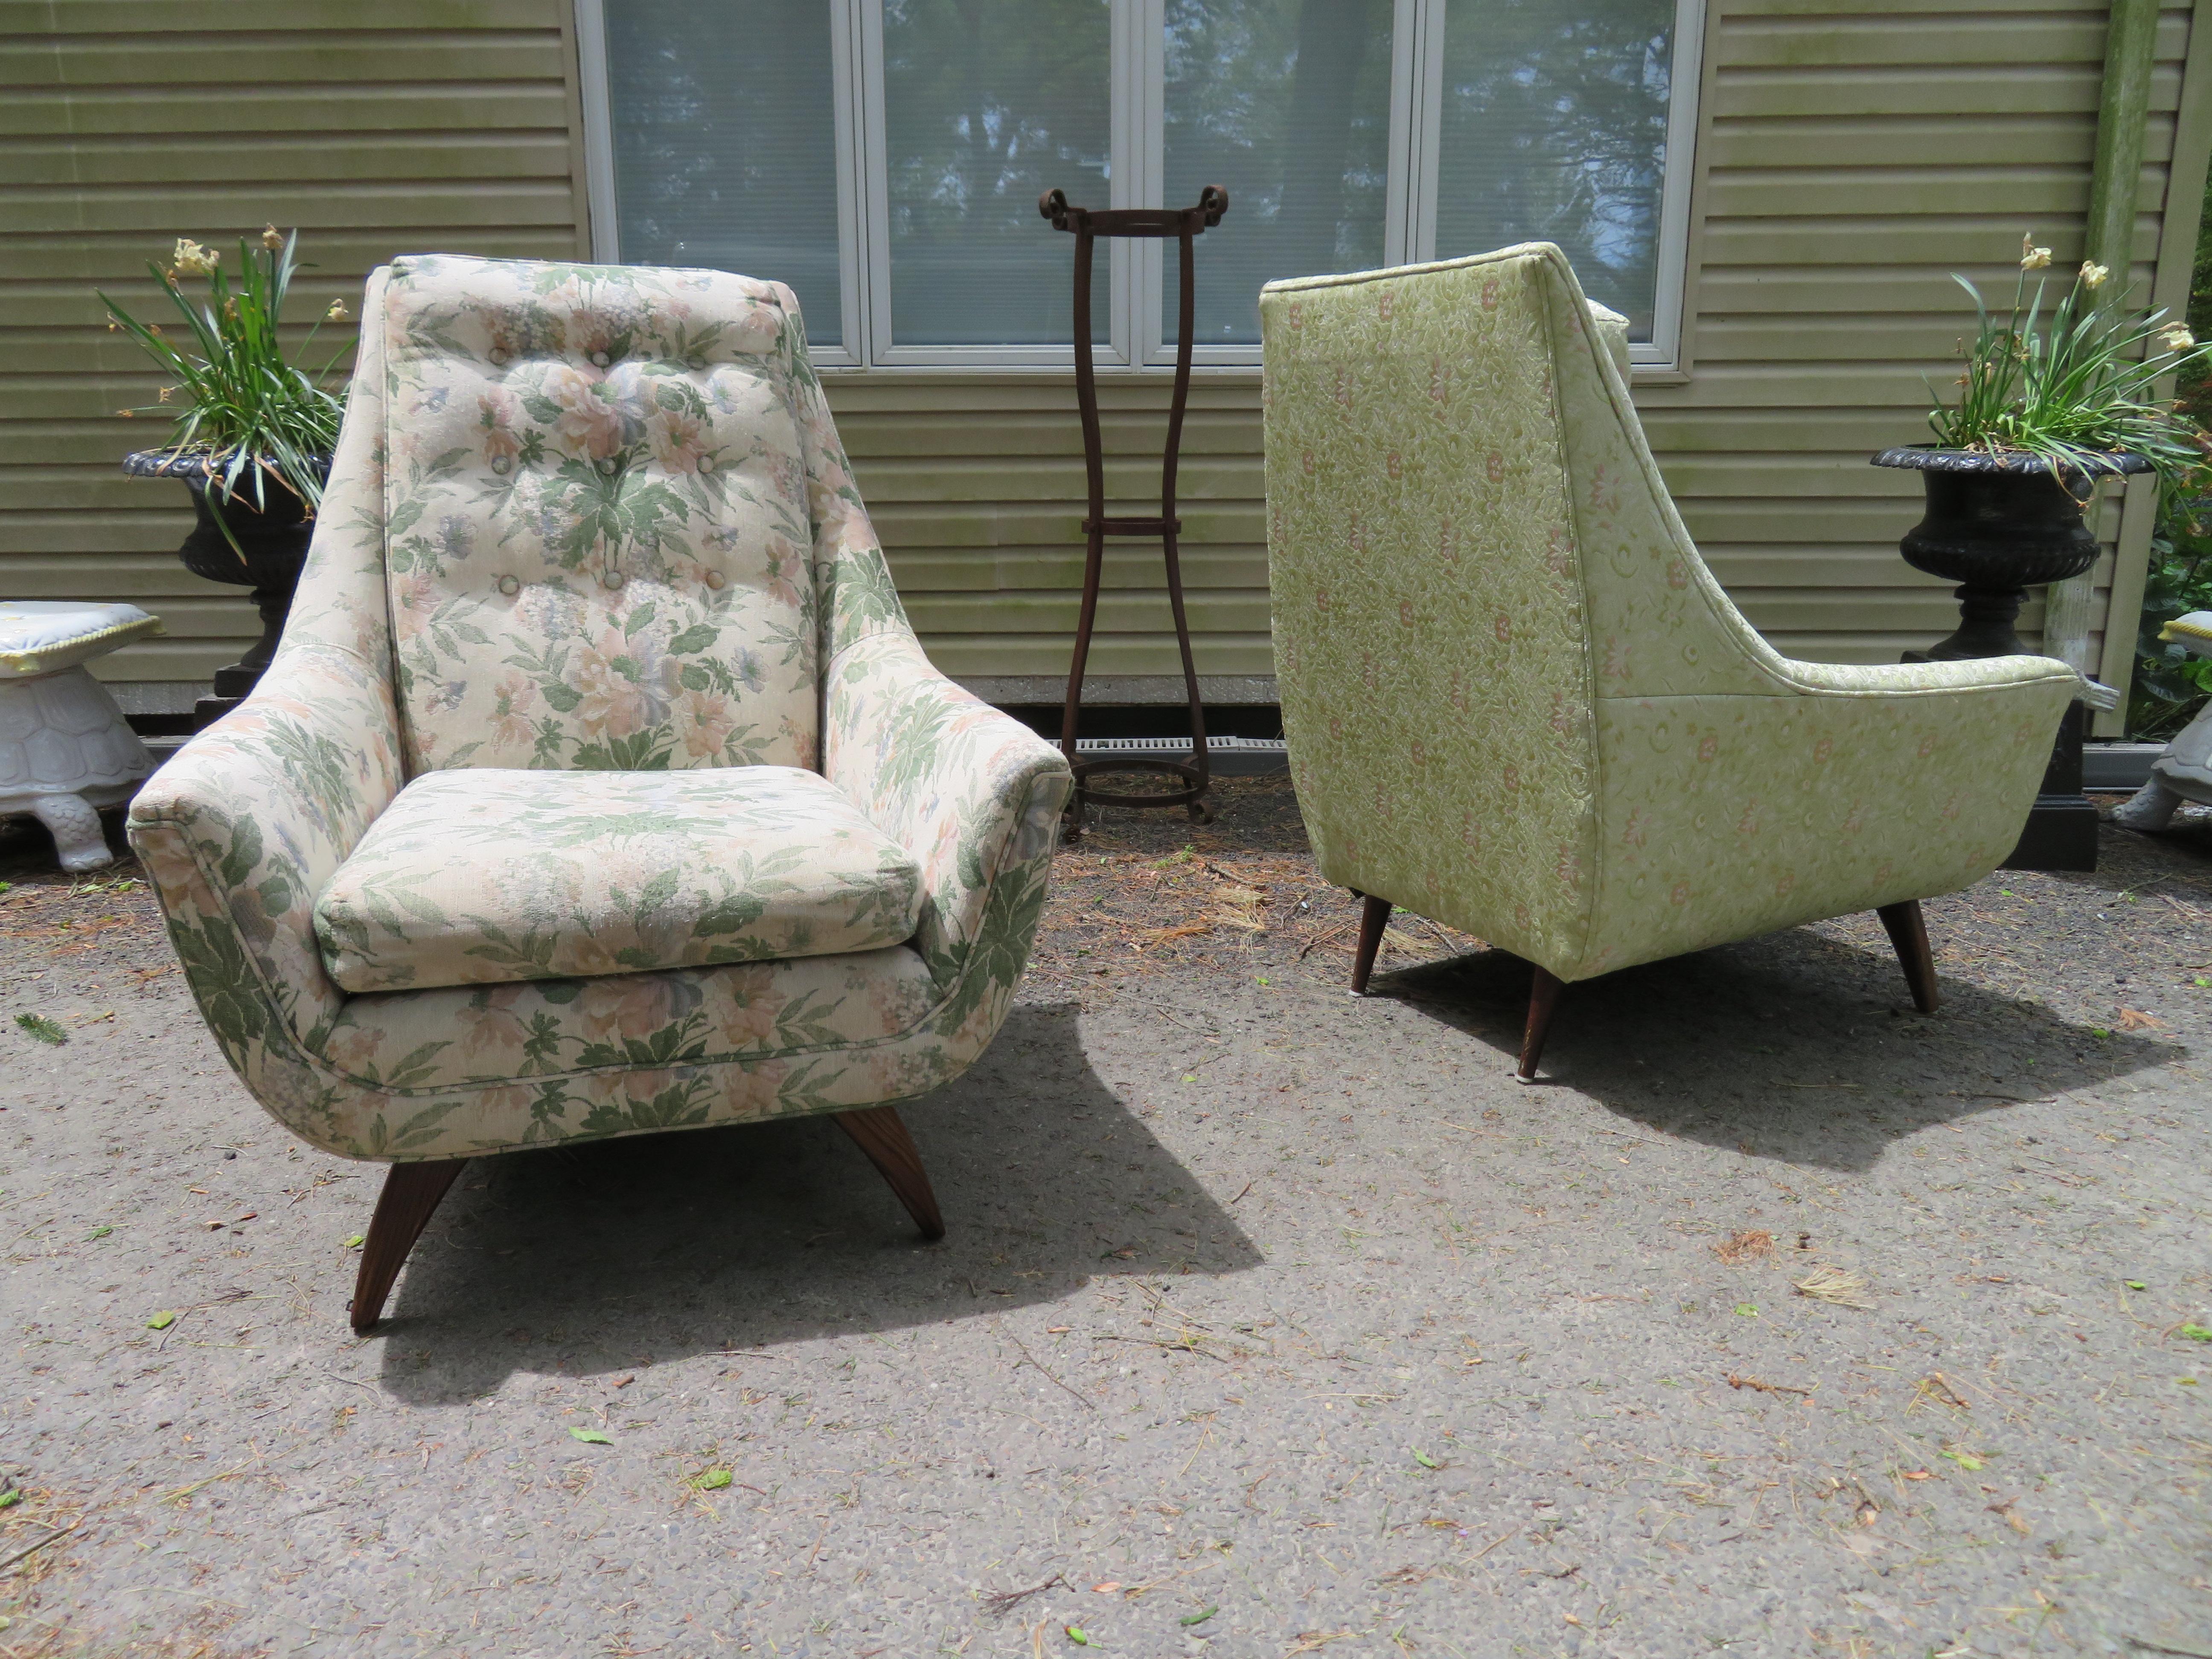 Handsome pair of tall back Adrian Pearsall style scoop lounge chairs. These chairs are made by the Bassett Furniture Company and were usually sold in sets call His + Hers sets with one chair being taller than the other. So finding a pair with both